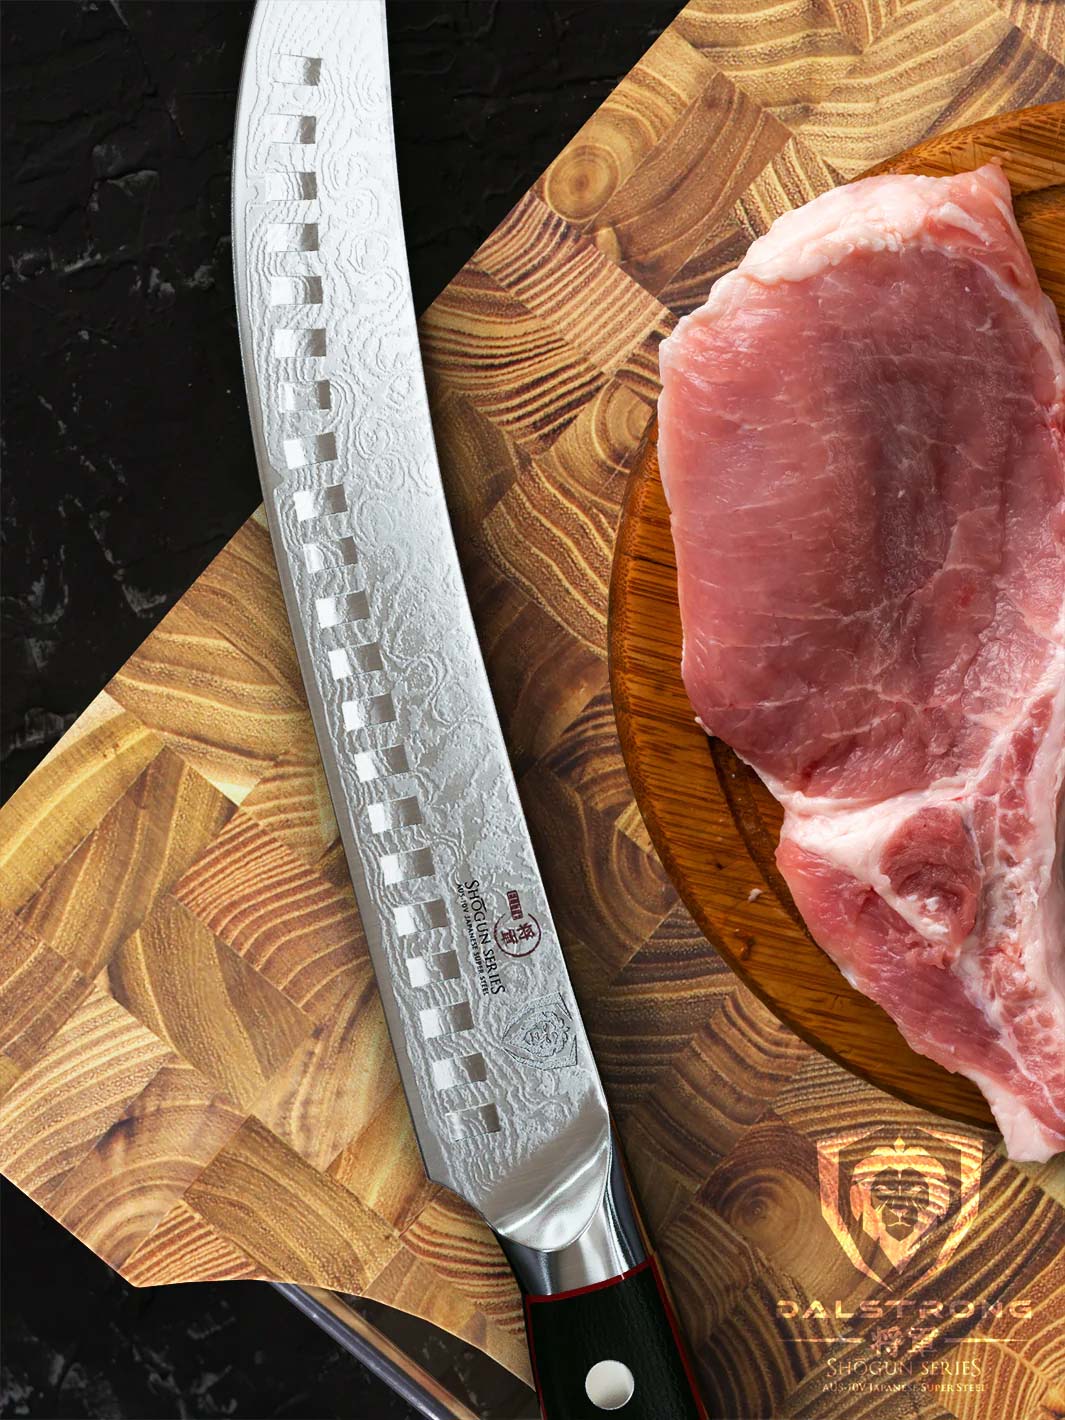 Dalstrong shogun series 8 inch butcher knife with black handle and a large cut of meat on top of a Dalstrong wooden board.